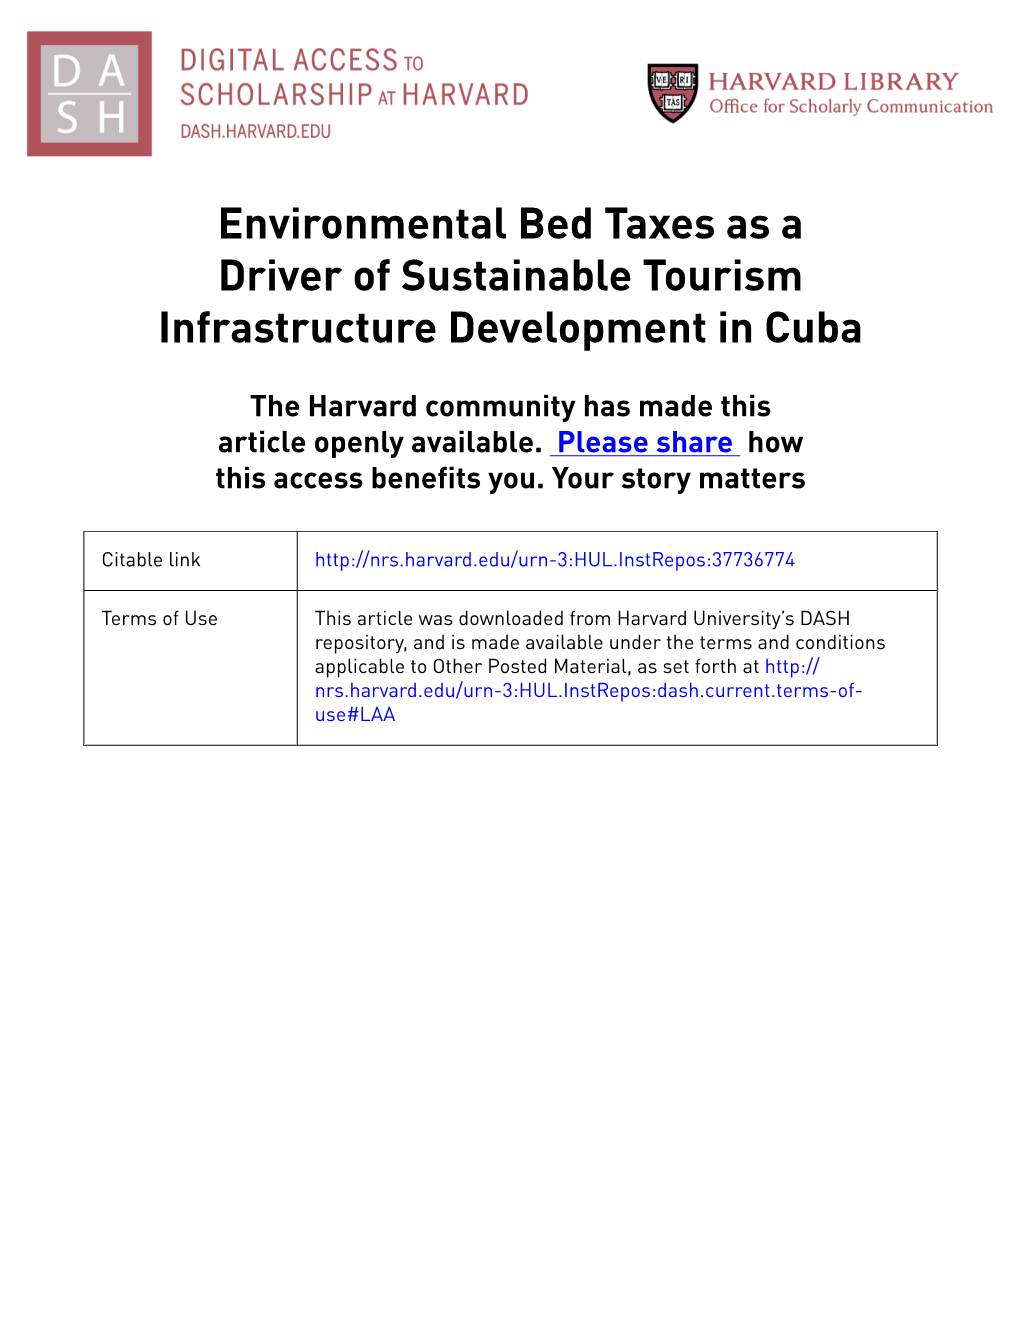 Environmental Bed Taxes As a Driver of Sustainable Tourism Infrastructure Development in Cuba